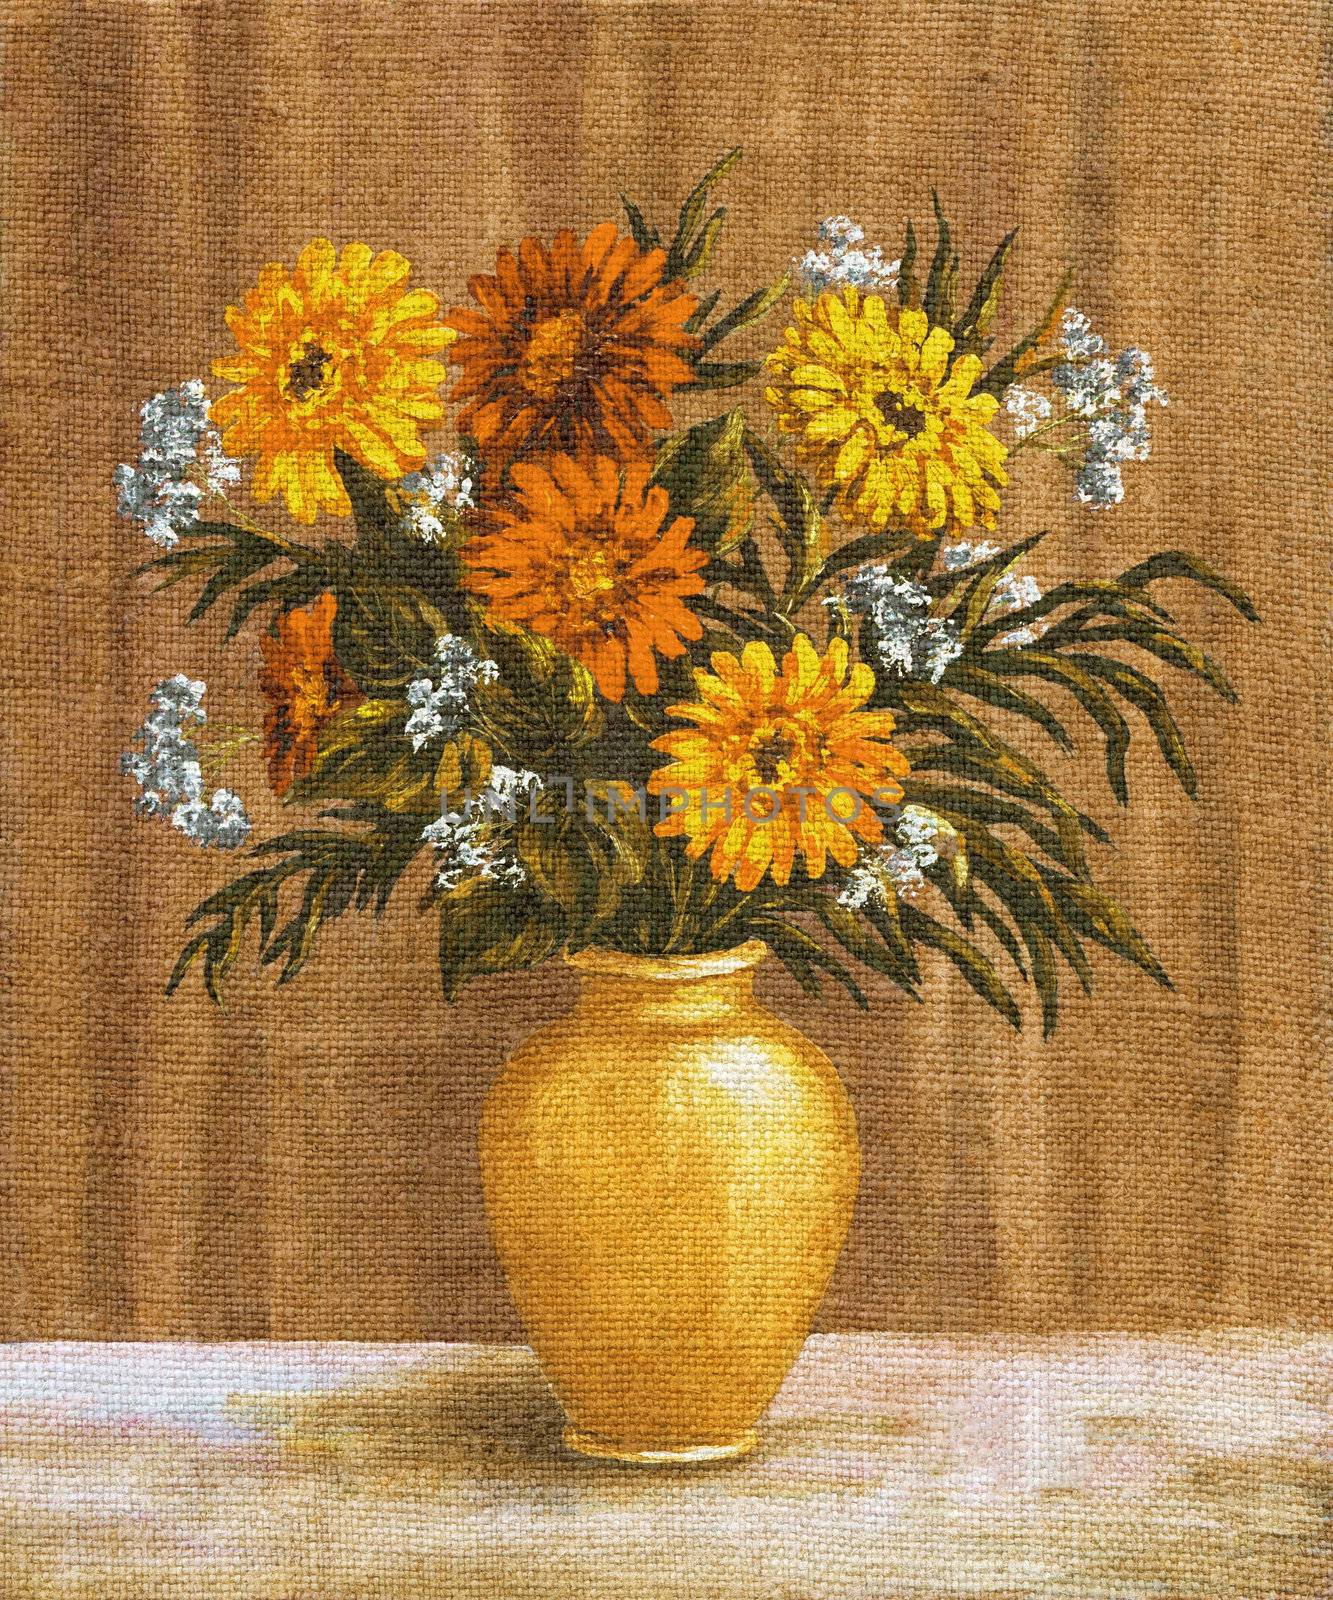 Flowers, bouquet in a ceramic jug. Picture, drawing oil paints on a canvas